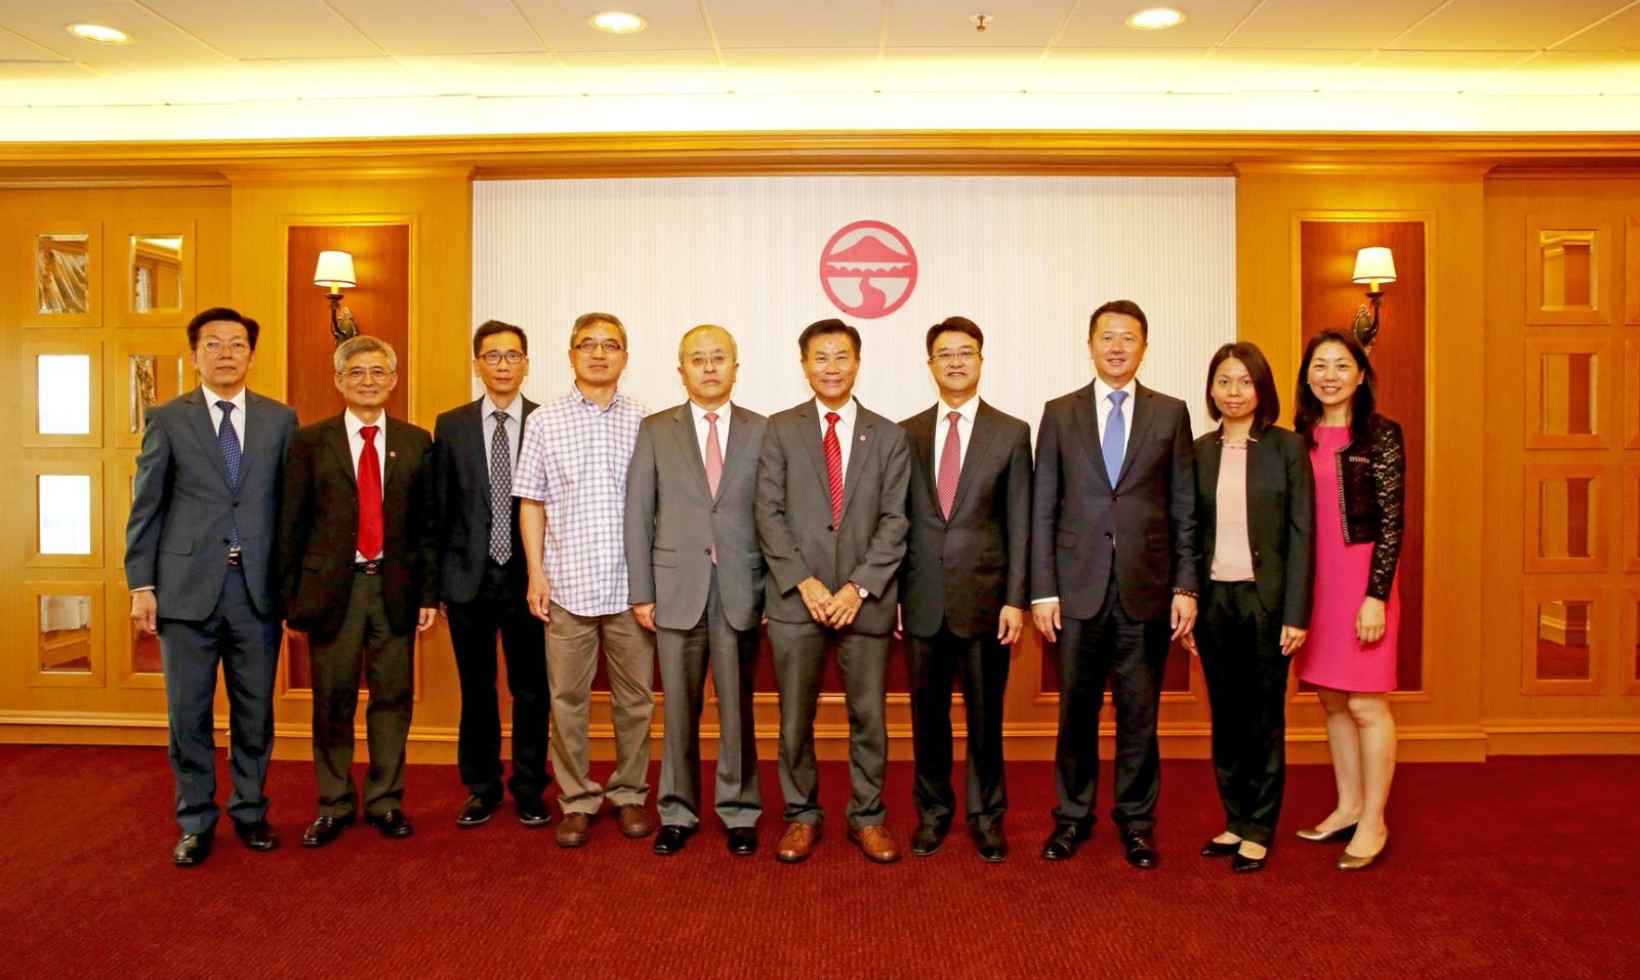 Lingnan University receives generous donation from CITIC Pacific to establish scholarships